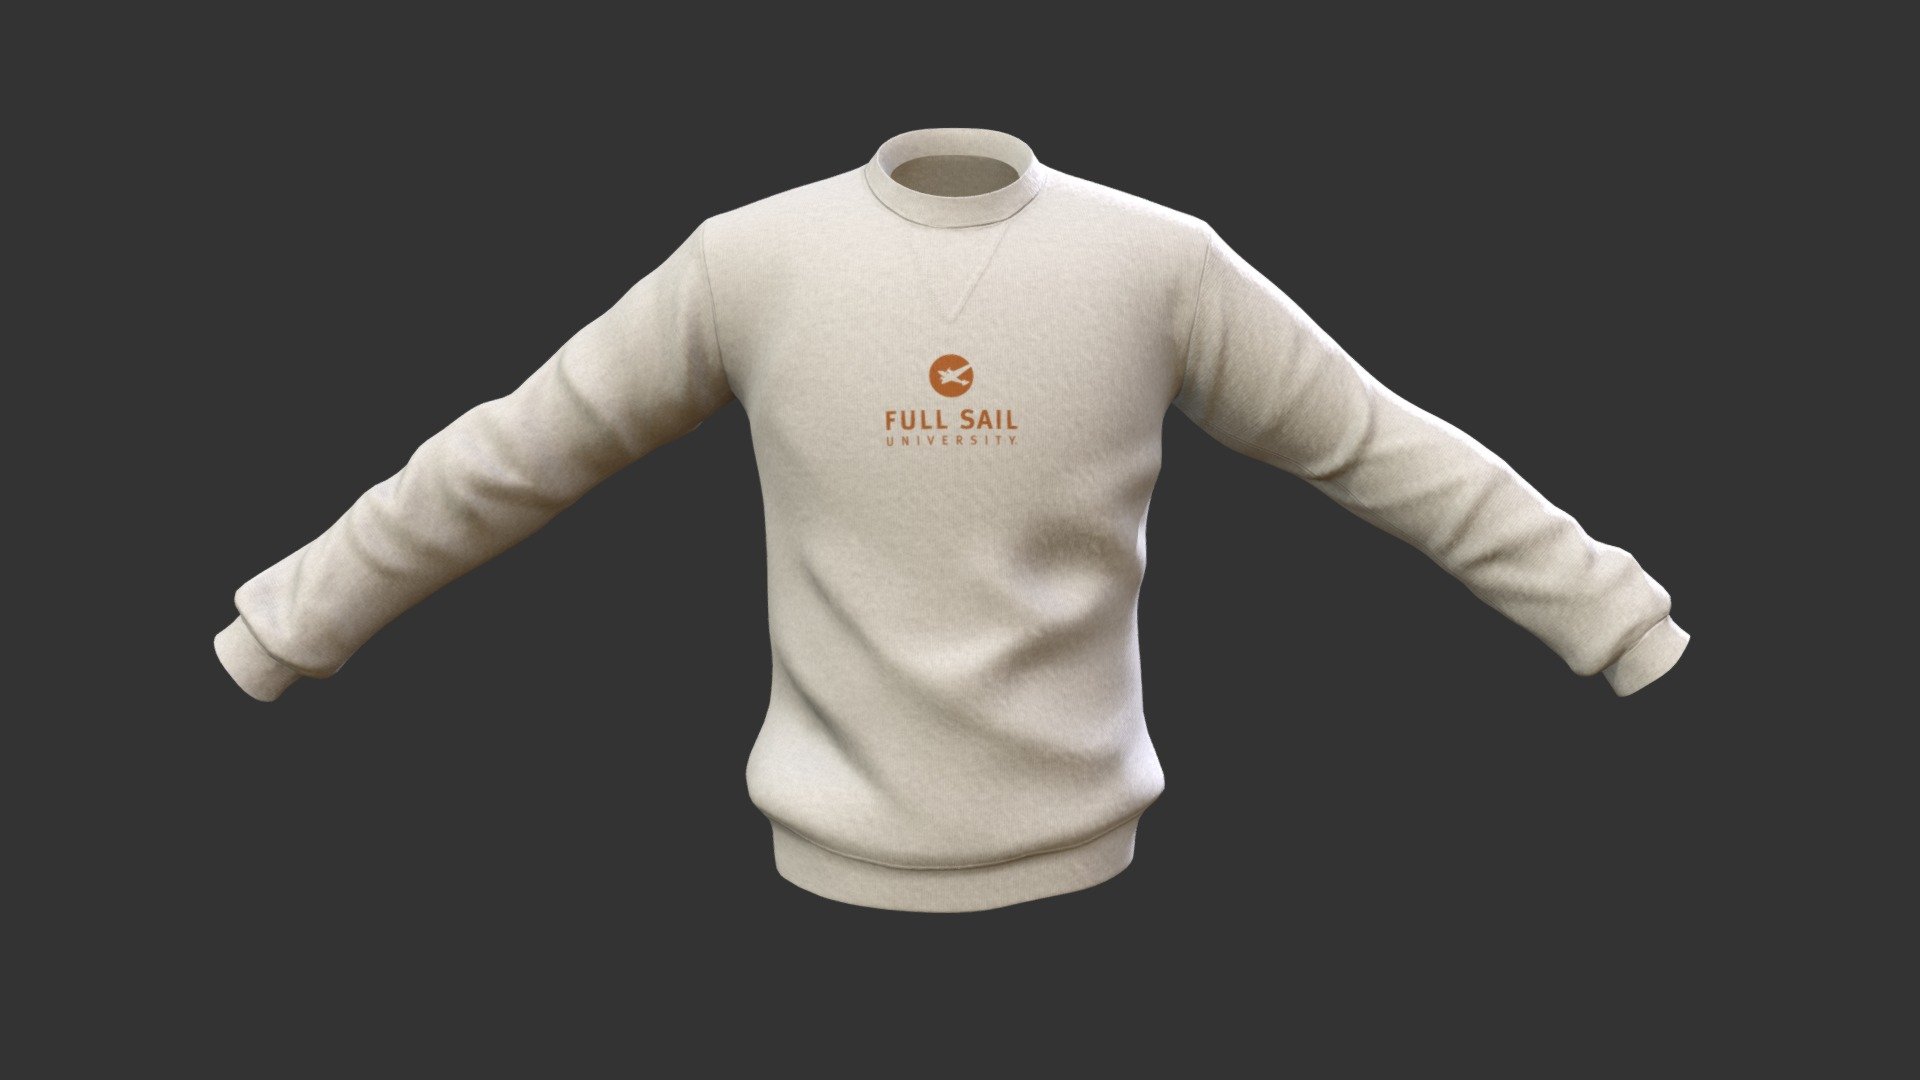 My sweatshirt folds and seams were inspired by a Fleece Crew-Neck Sweatshirt I found on Amazon, but for the textures, I made it look like the Full Sail Sweatshirt that I have at home 3d model